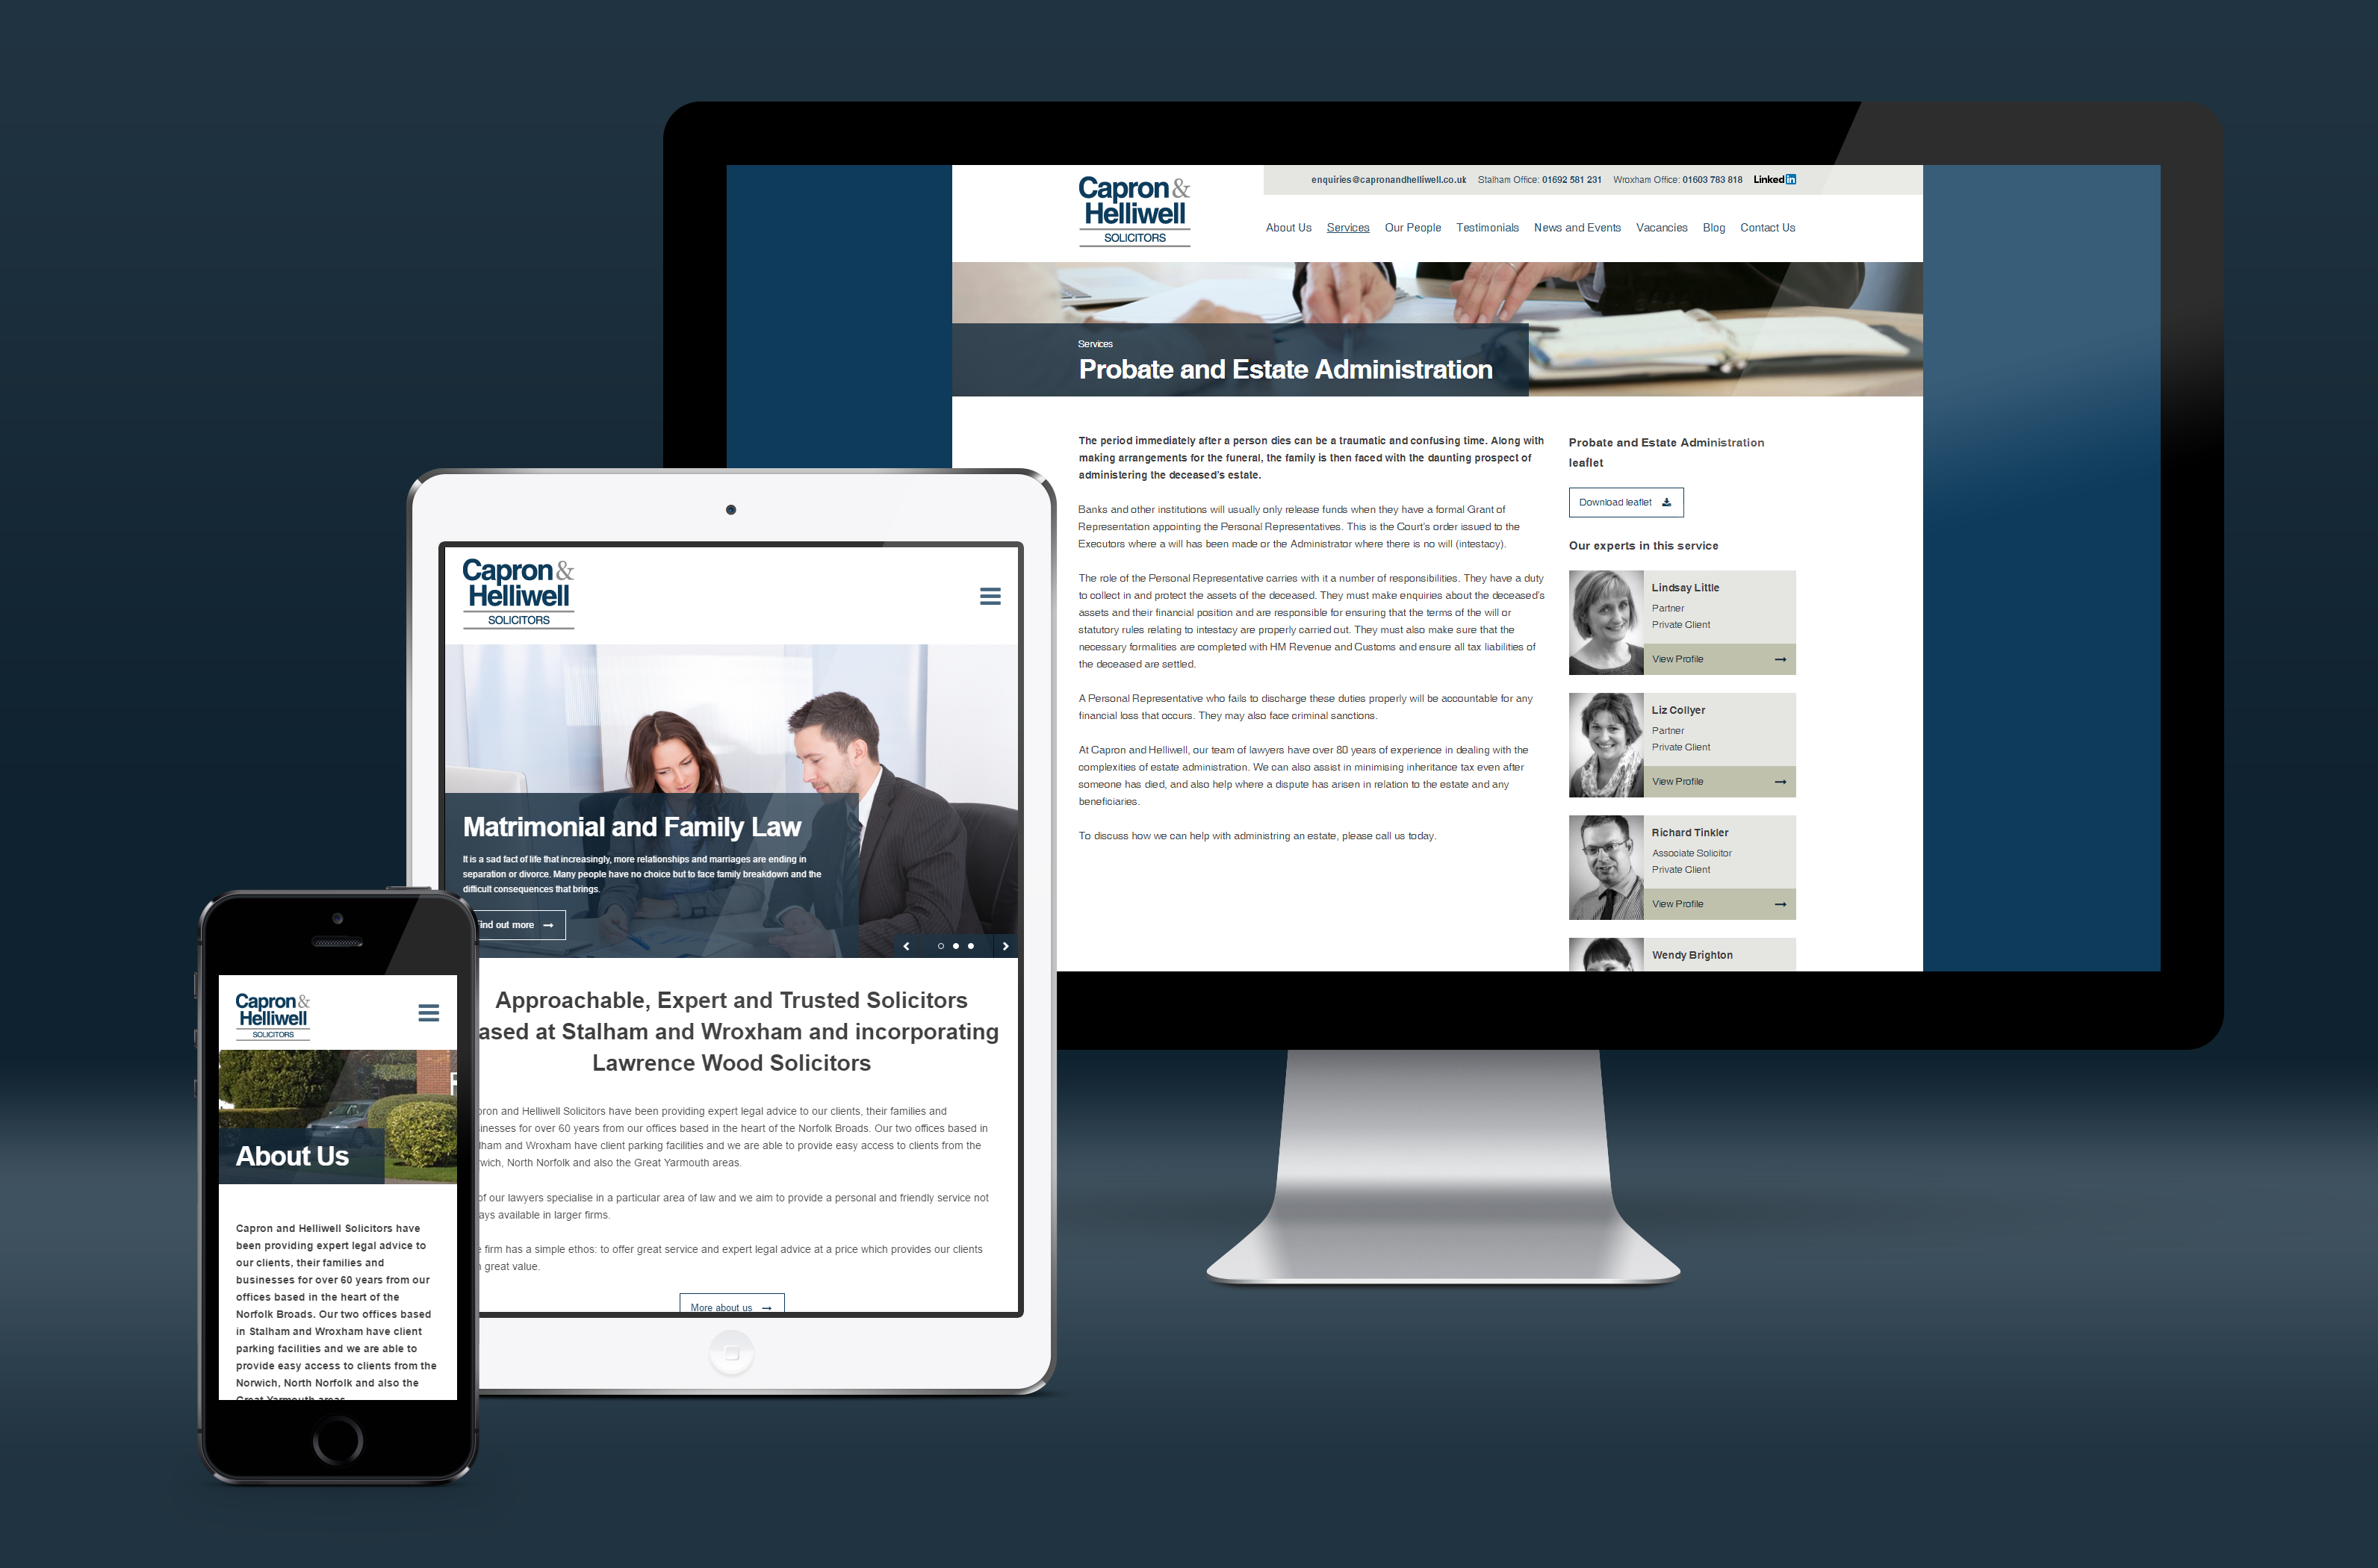 Capron & Helliwell Solicitors website launched